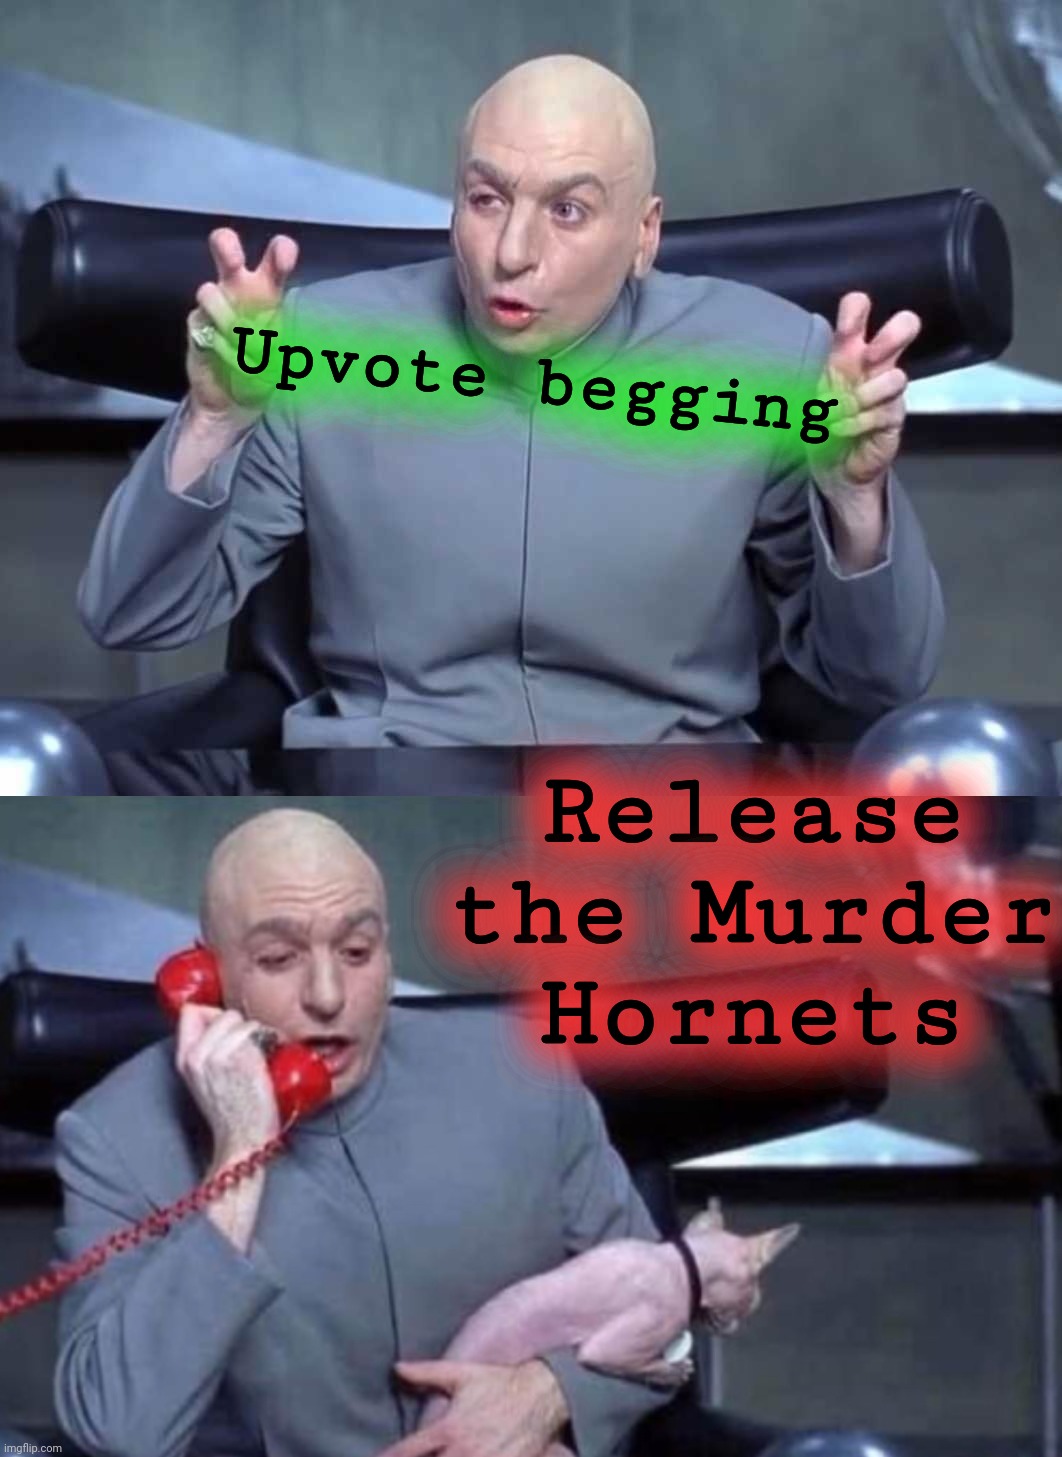 Upvote begging Release the Murder Hornets | image tagged in dr evil quotes,dr evil and frau | made w/ Imgflip meme maker